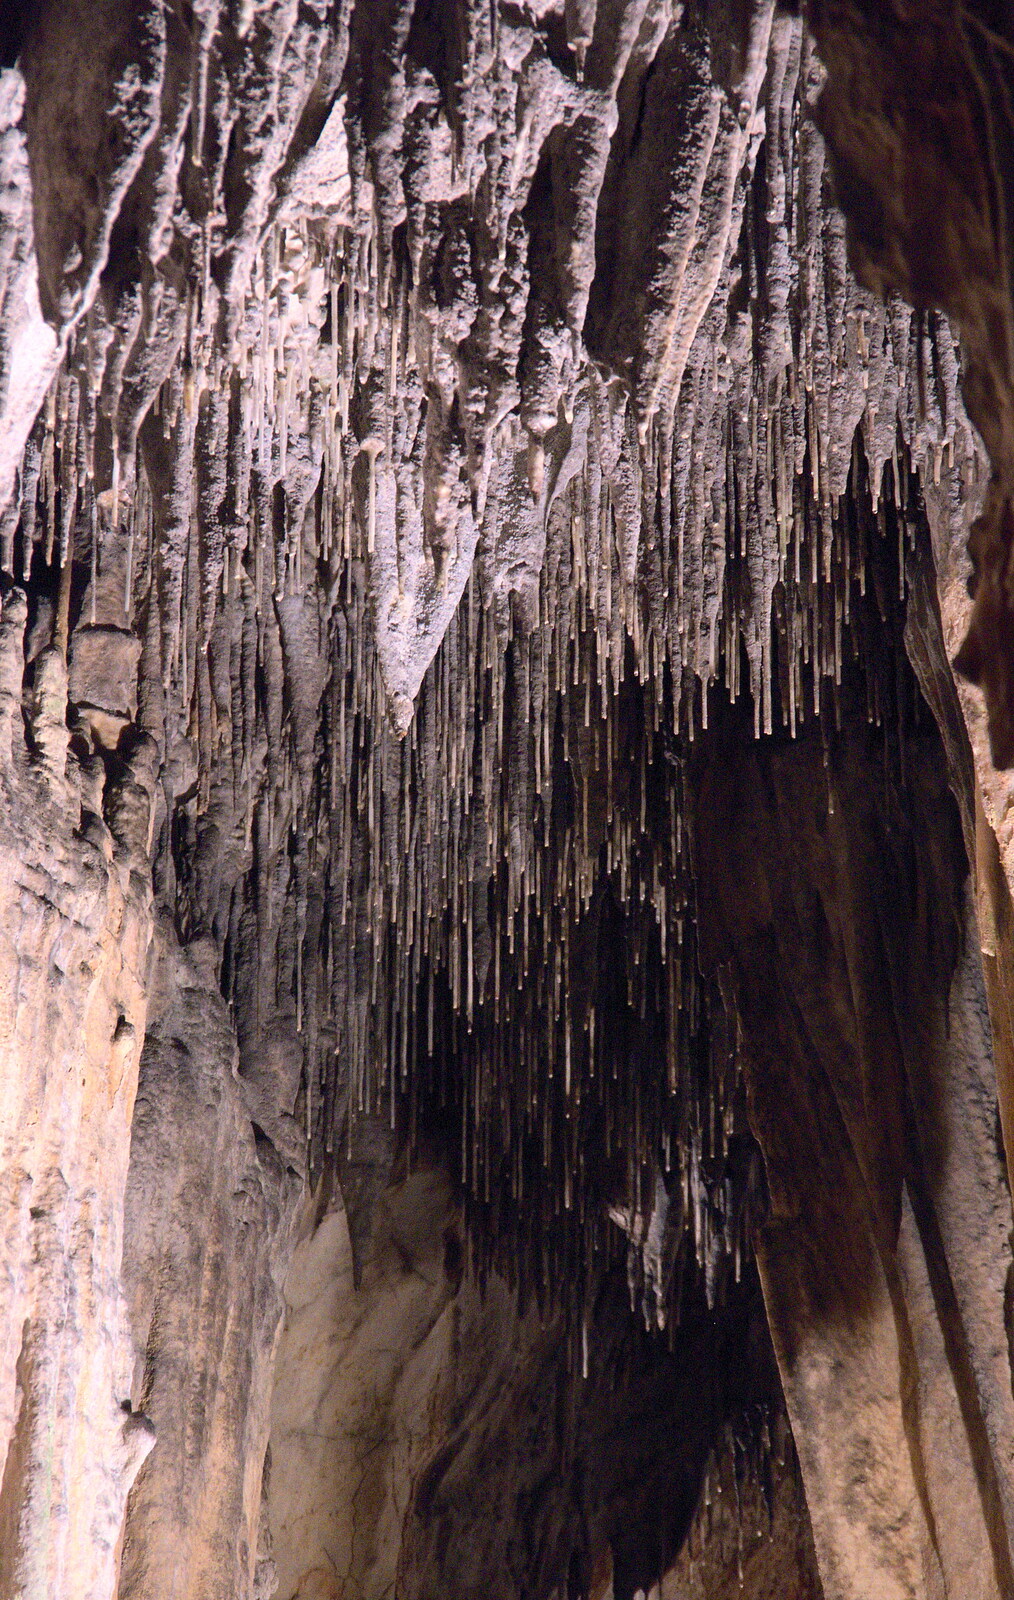 Hundreds of needle-like stalactites dangle from Le Gouffre Géant and Grotte de Limousis, Petanque and a Lightning Storm, Languedoc, France - 12th August 2018